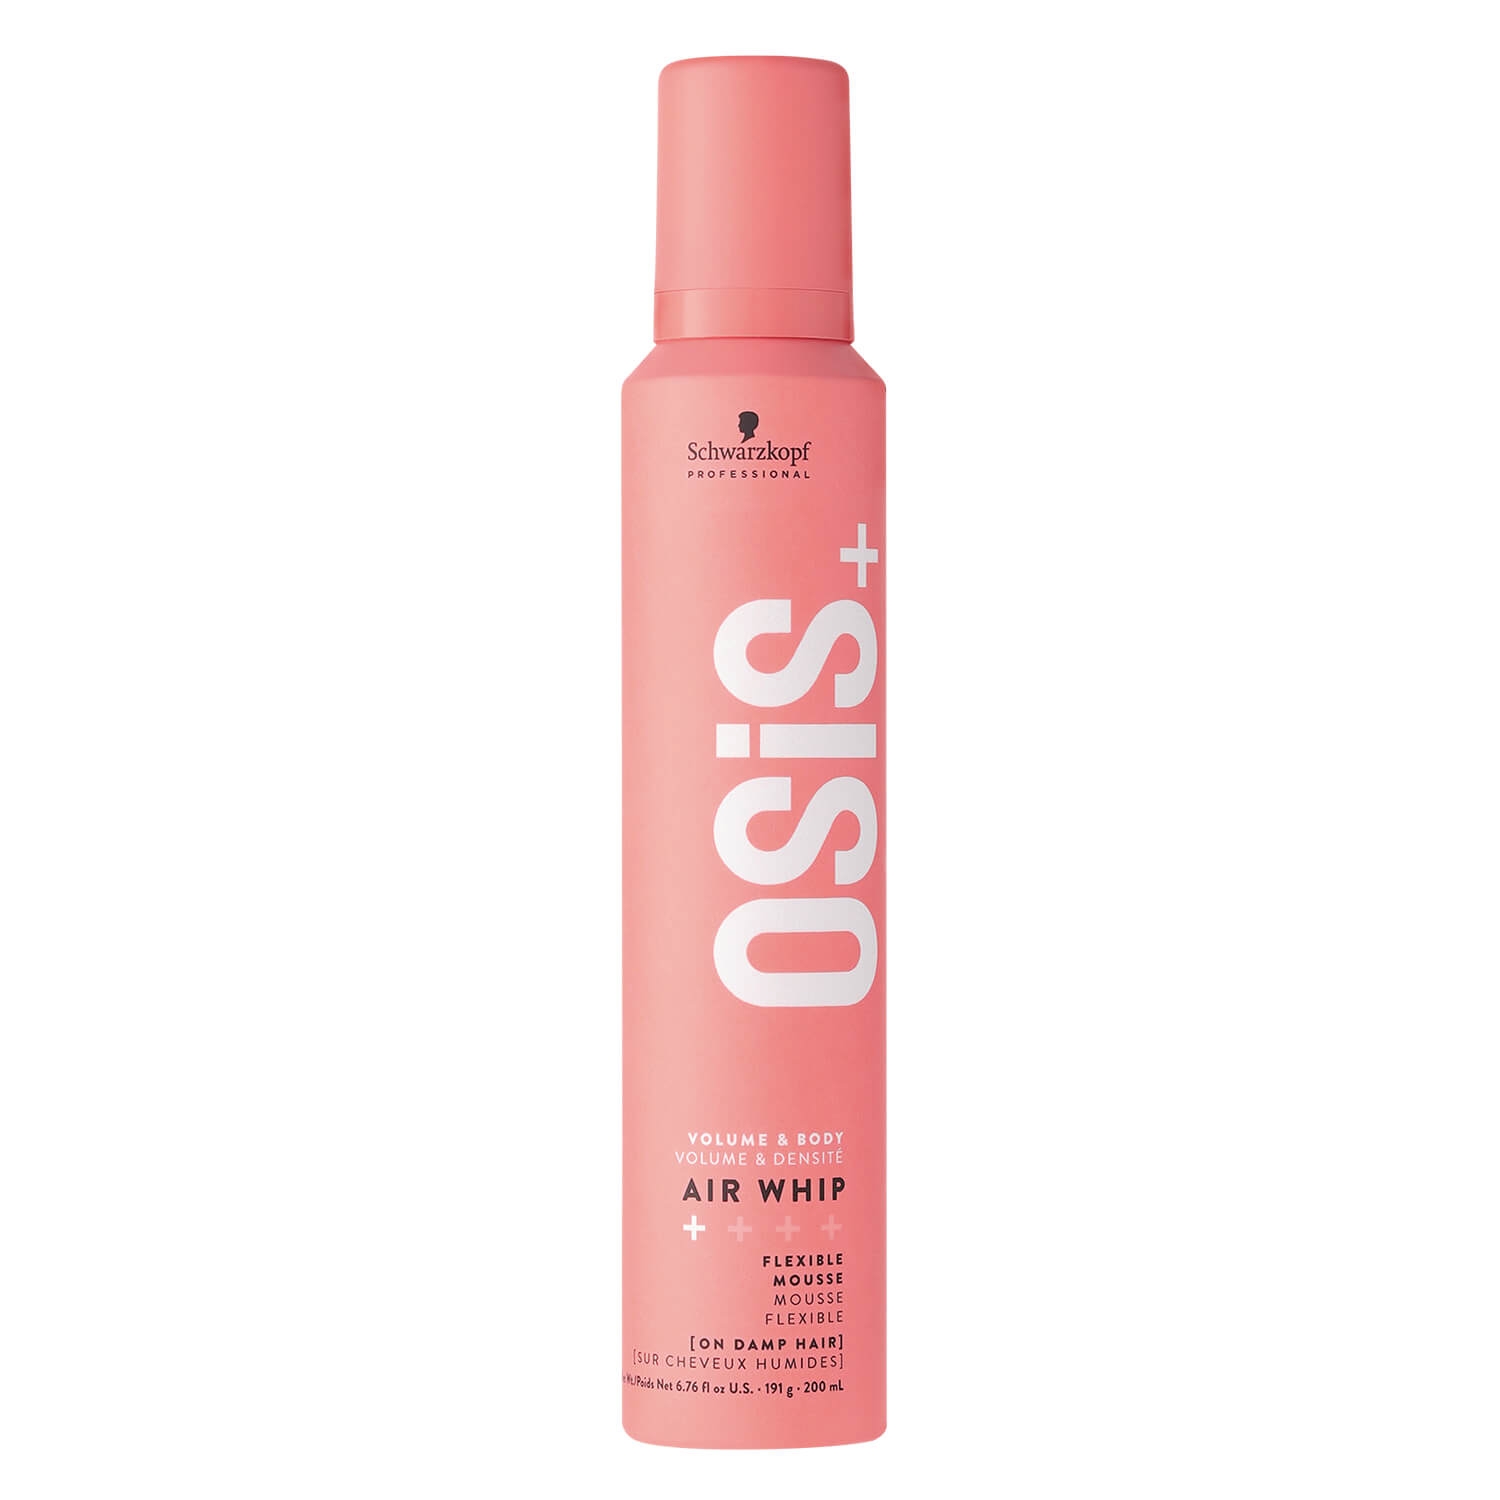 Product image from Osis - Air Whip Flexible Mousse